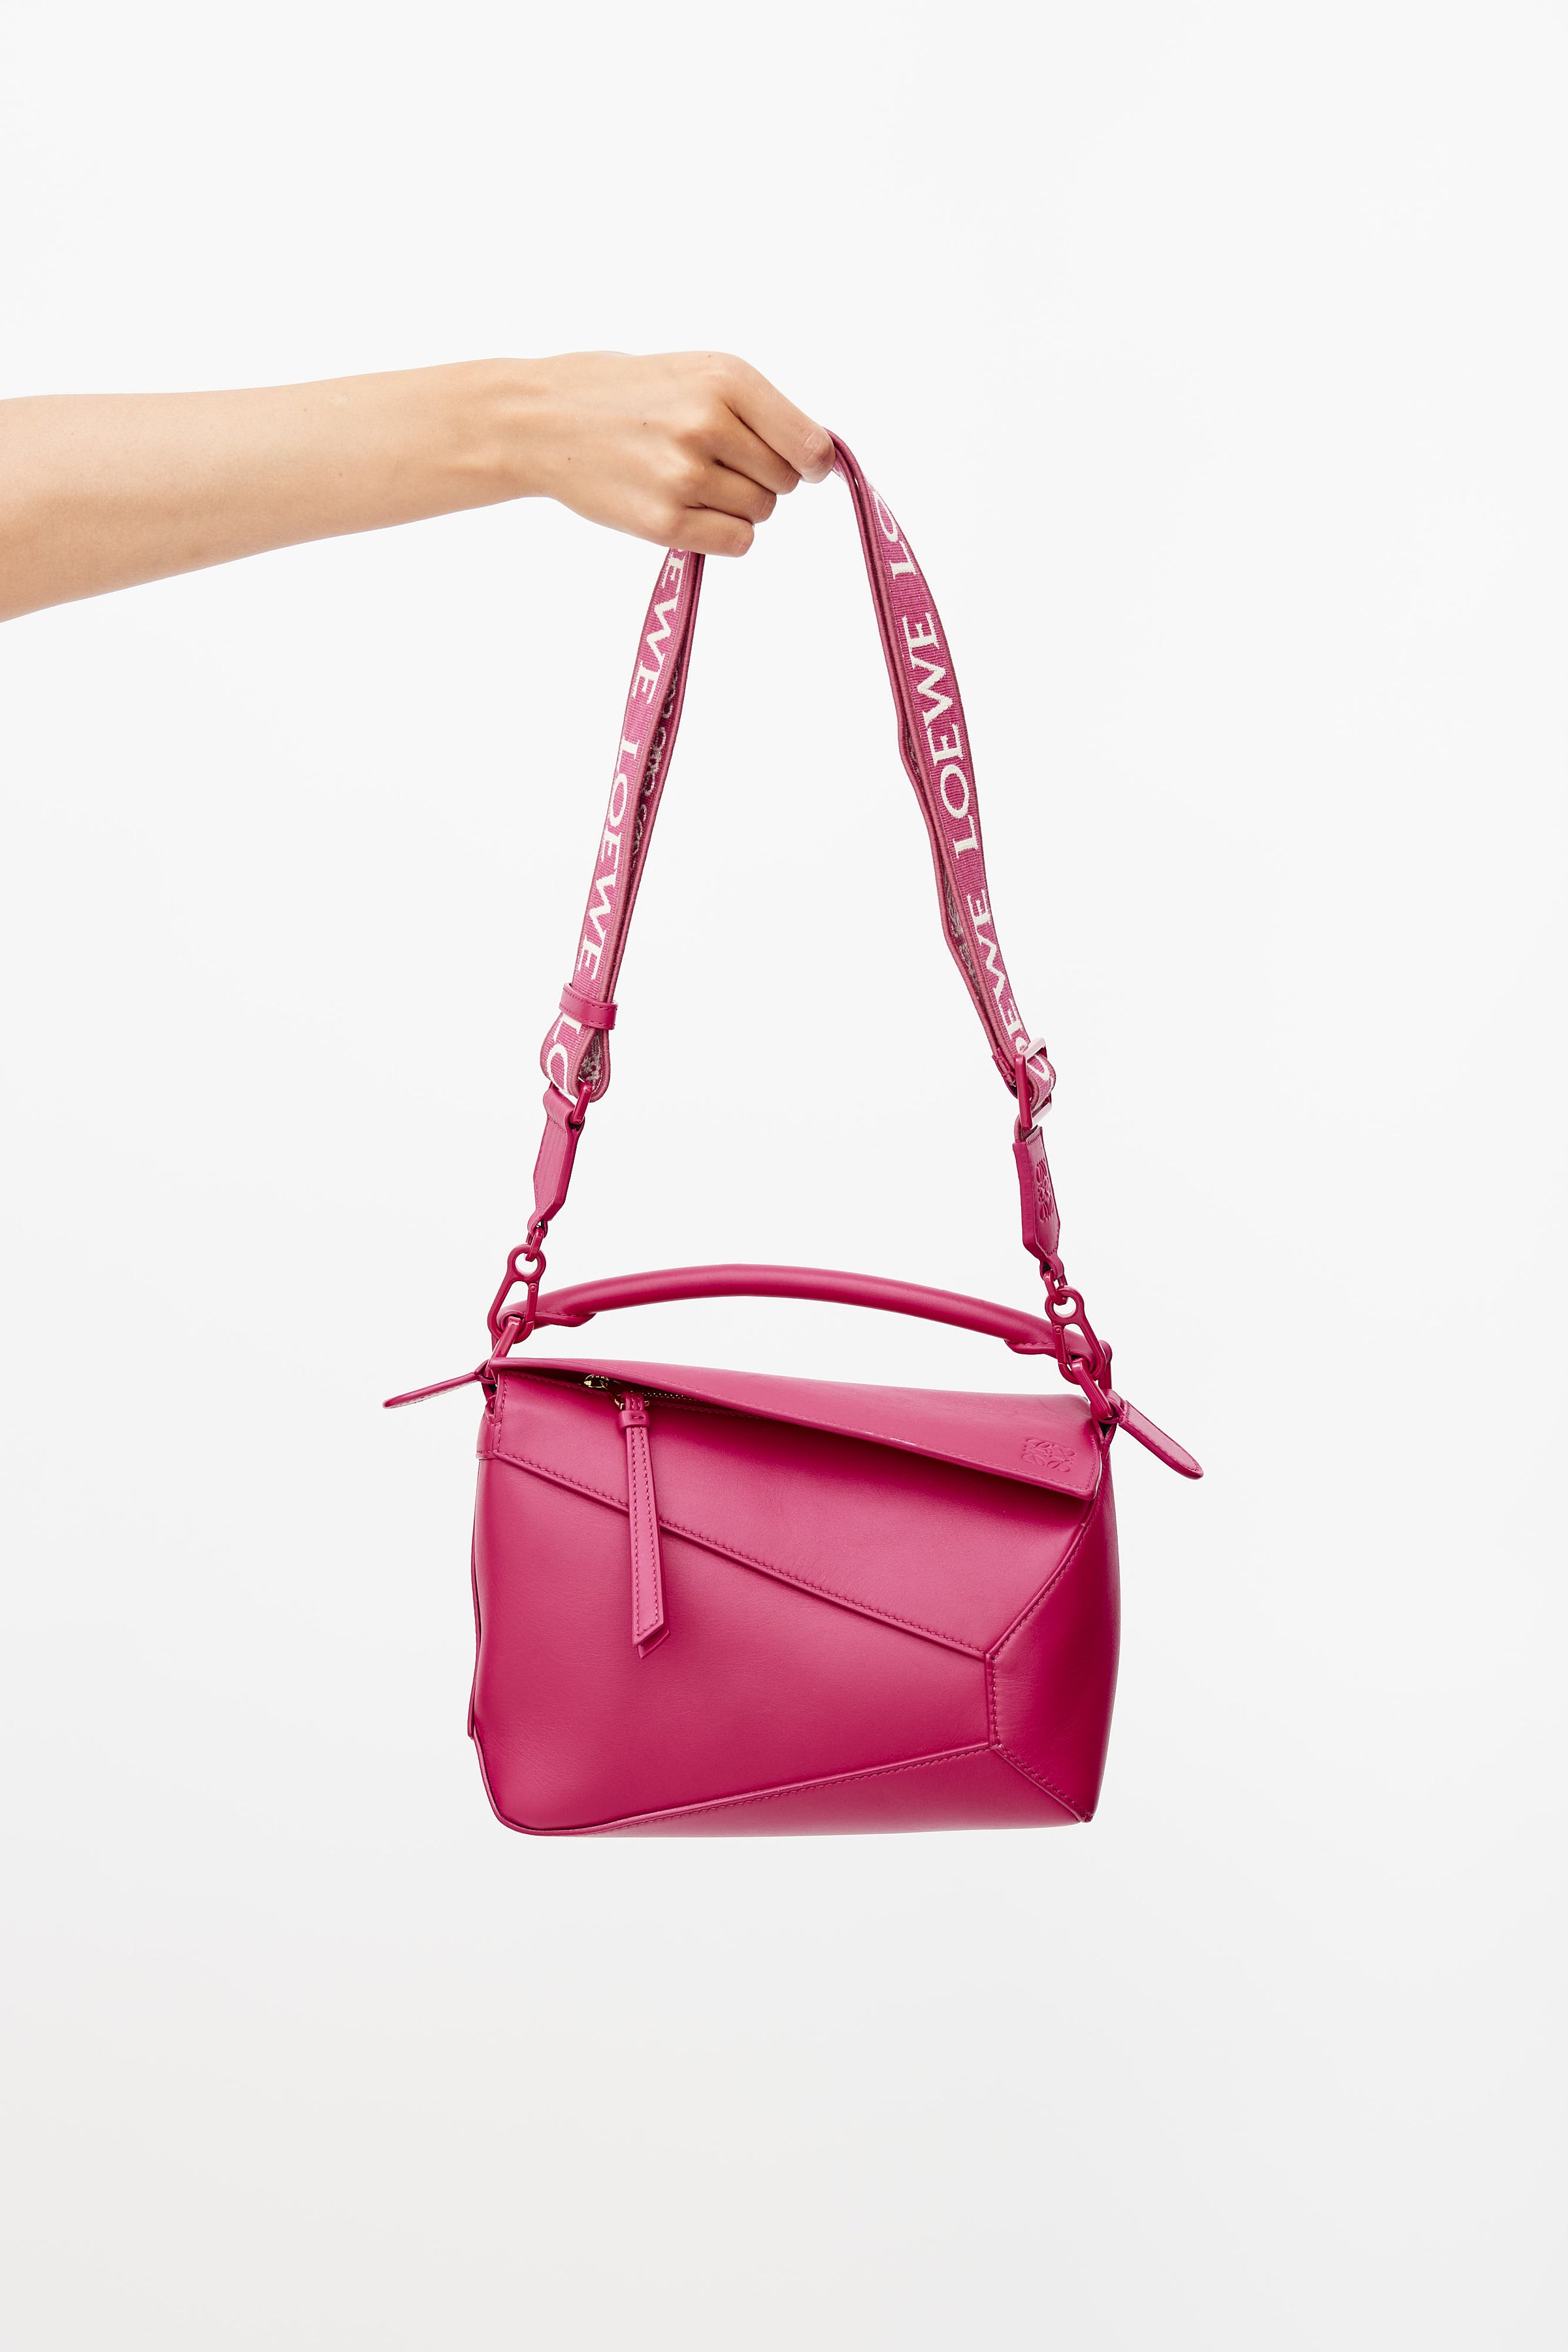 loewe's Puzzle Bag is the missing piece to a well-curated purse